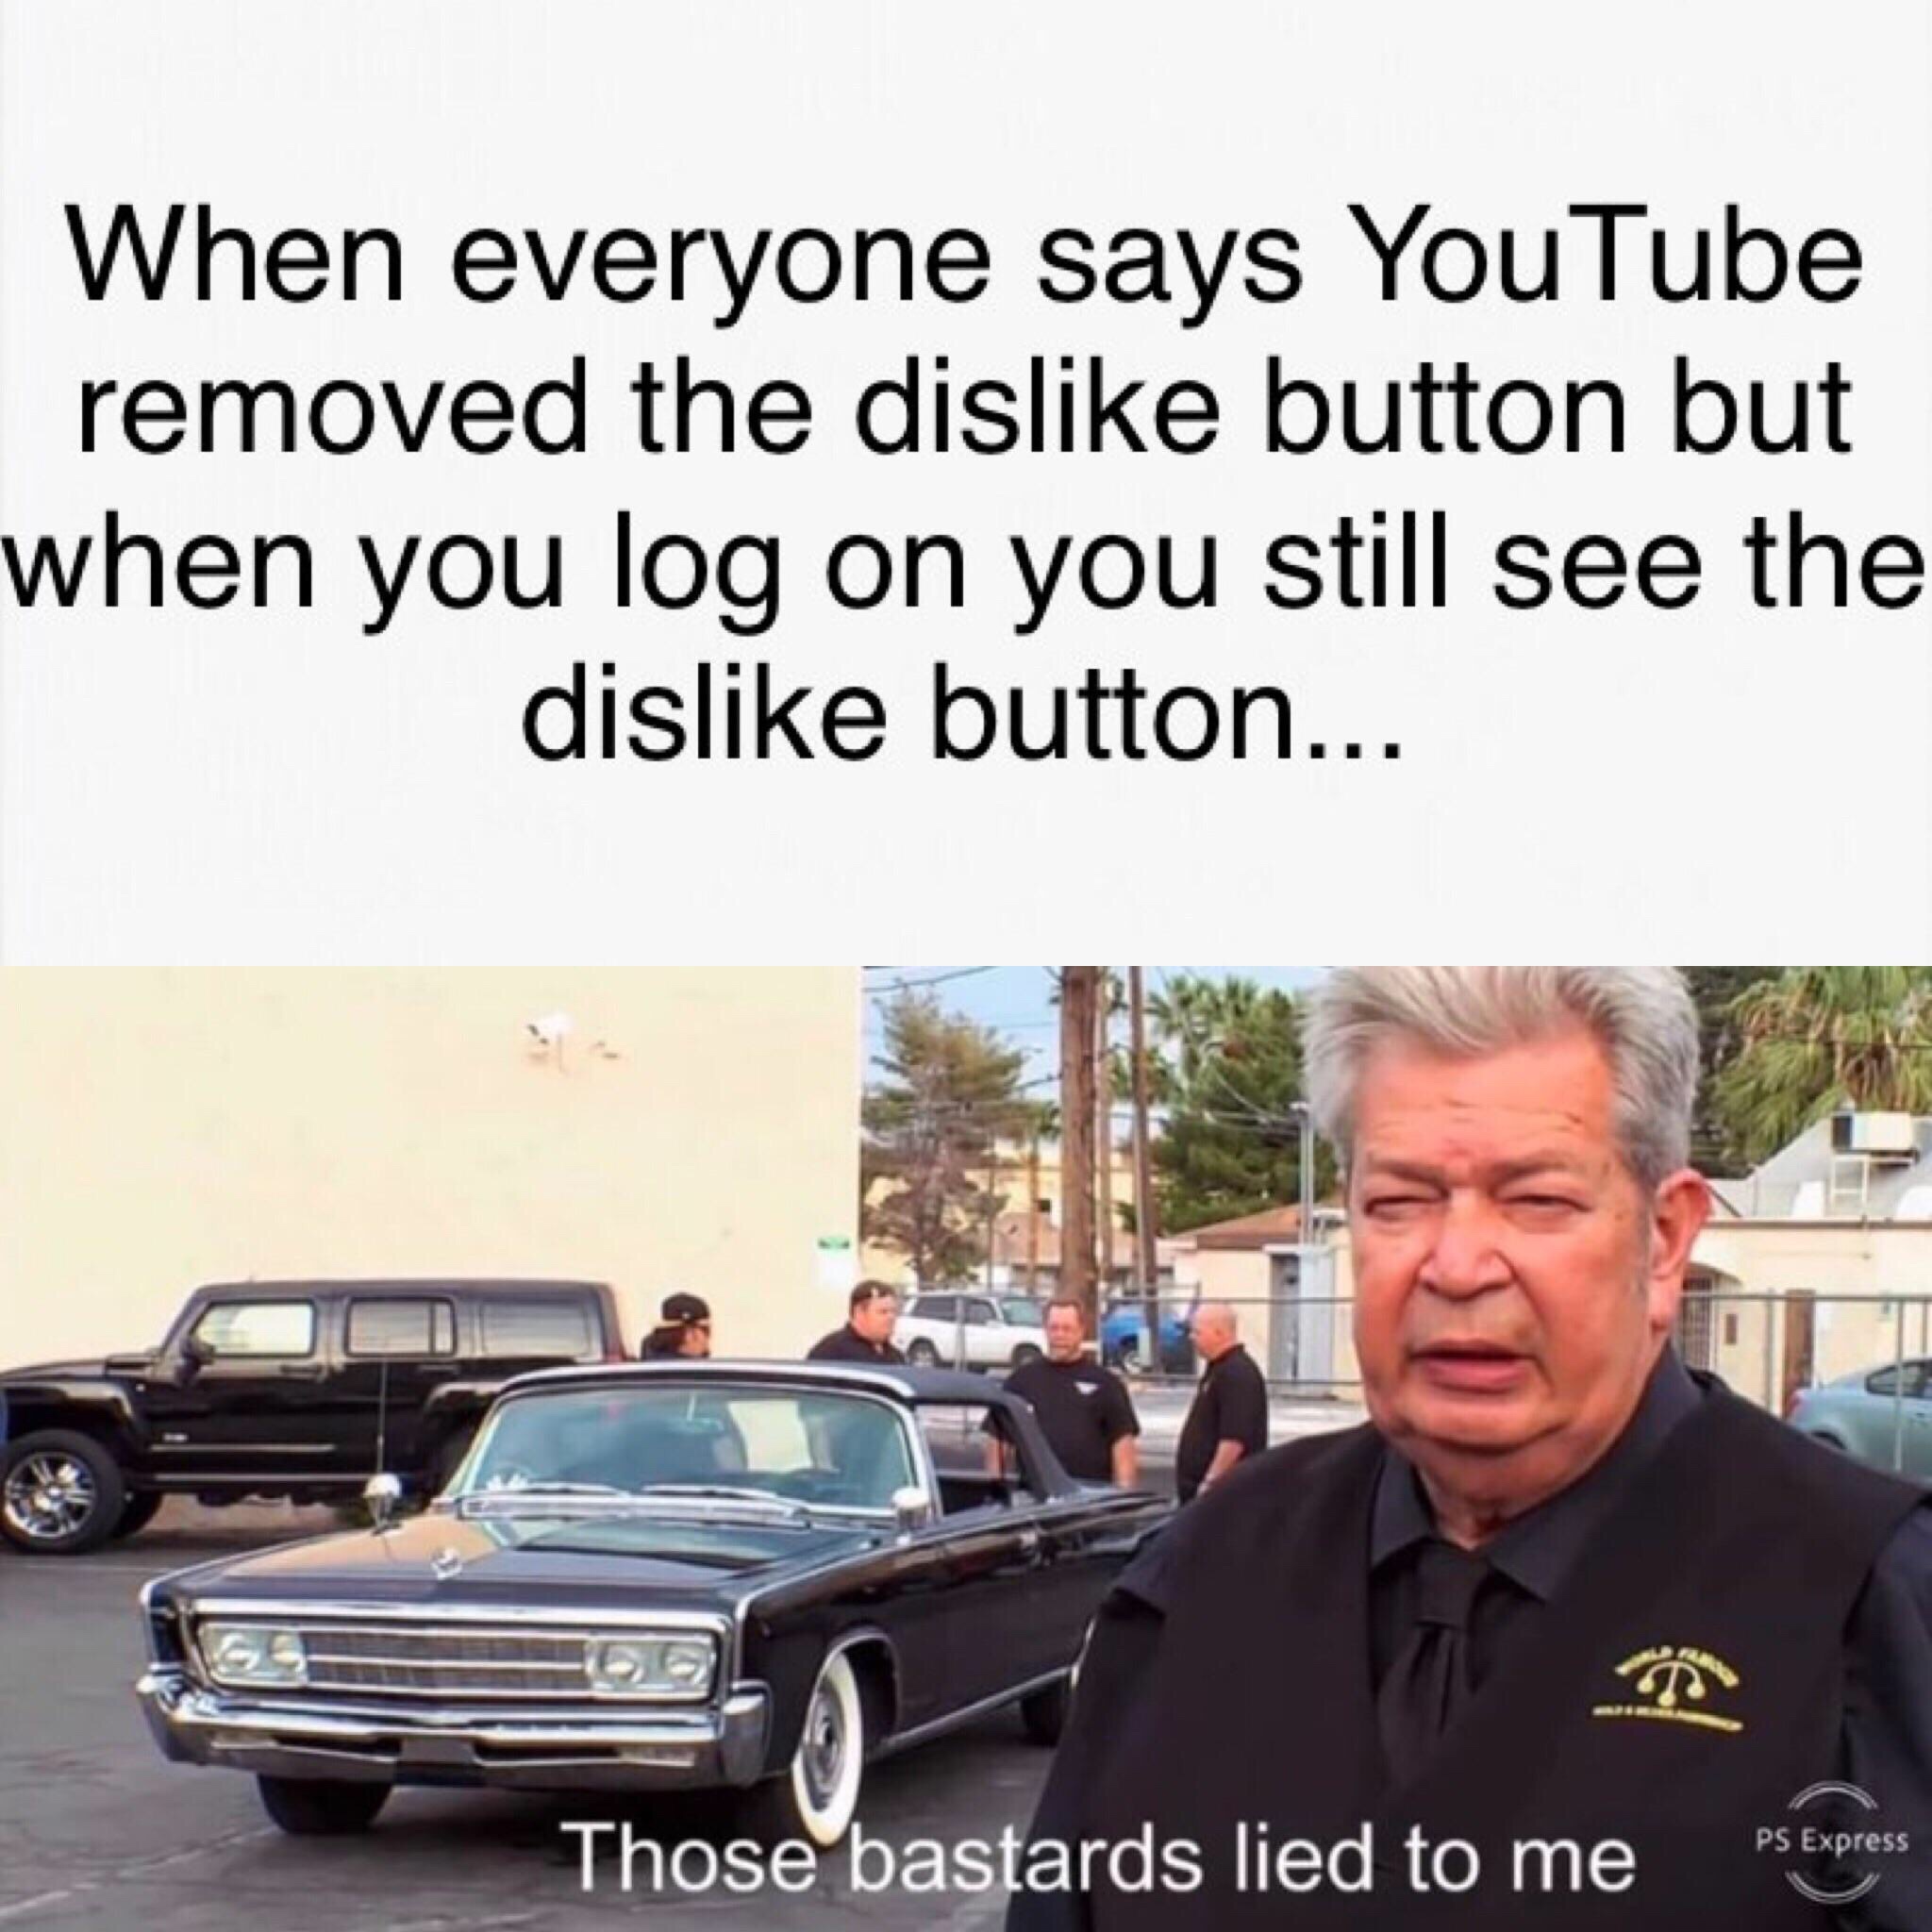 dank memes those bastards lied to me meme - When everyone says YouTube removed the dis button but when you log on you still see the dis button... Those bastards lied to me!